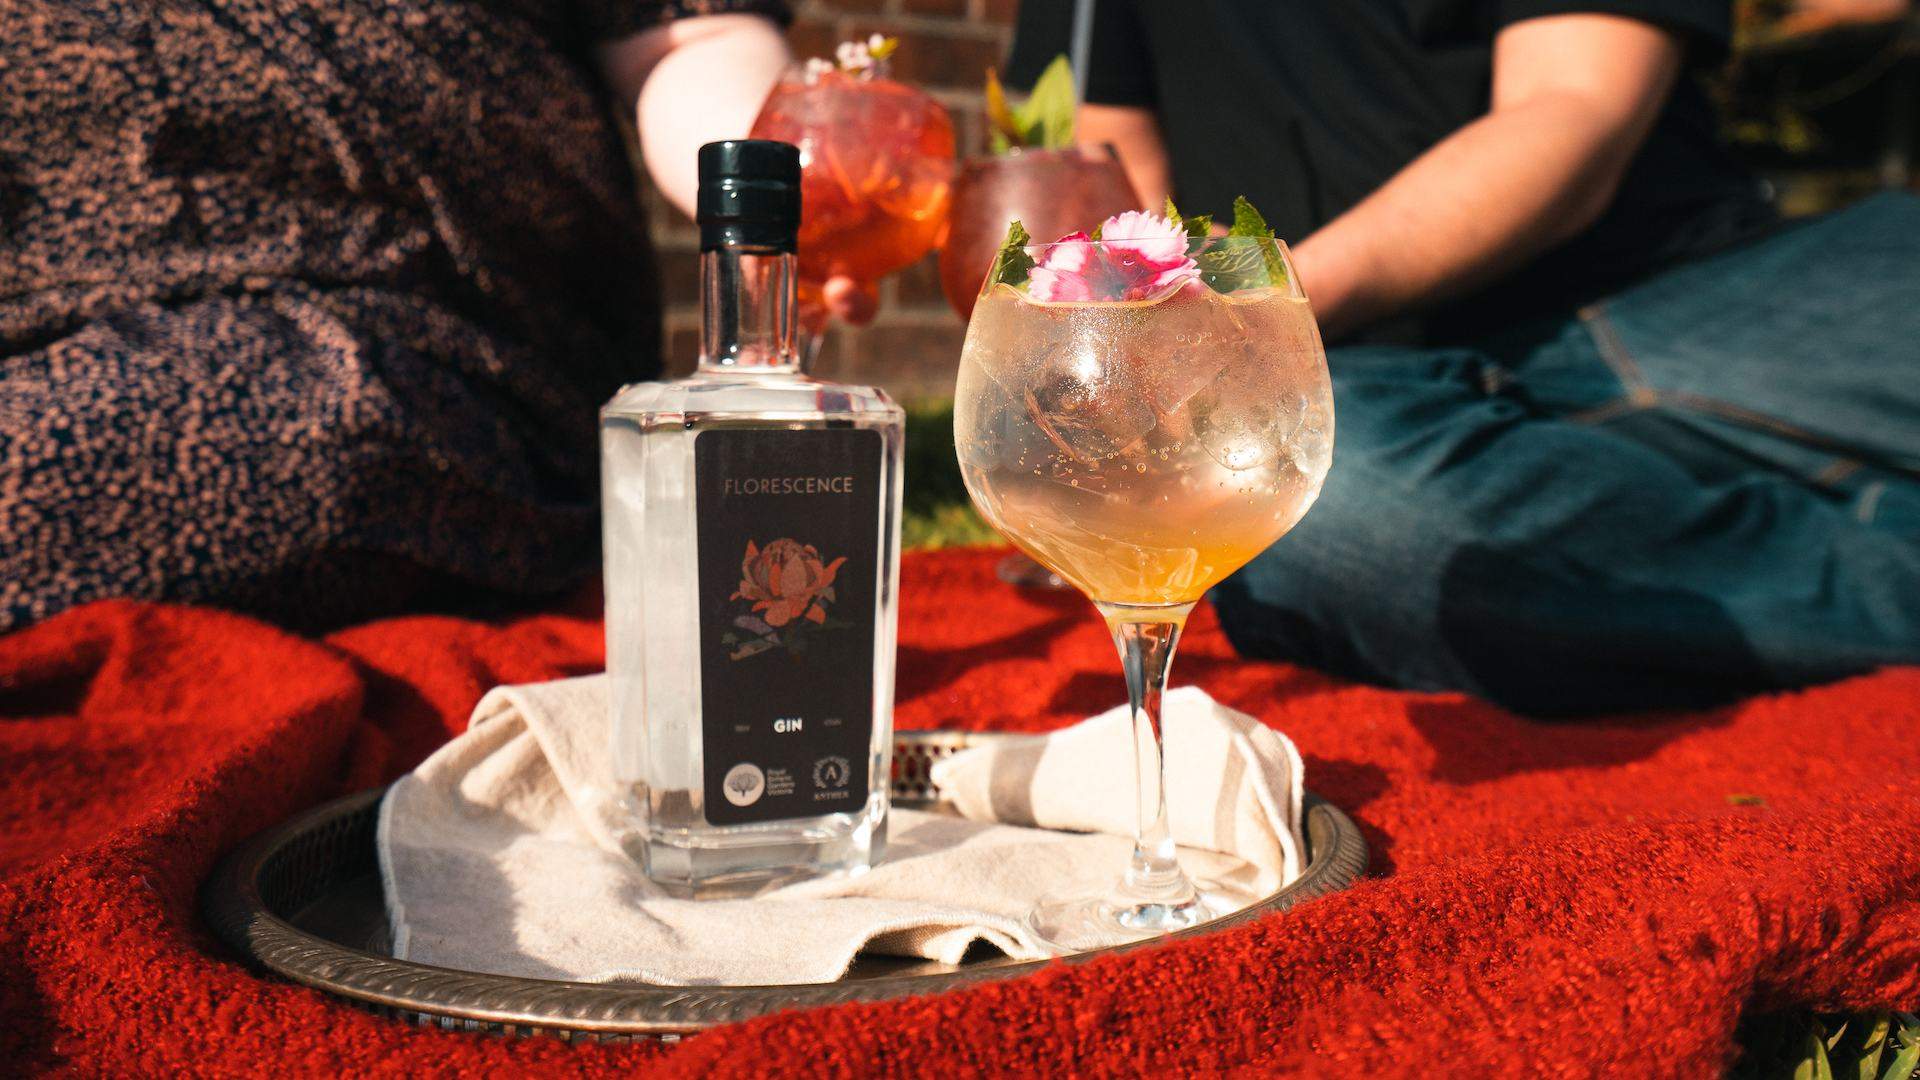 Florescence Is the New Homegrown Gin Crafted on Plants from the Royal Botanic Gardens